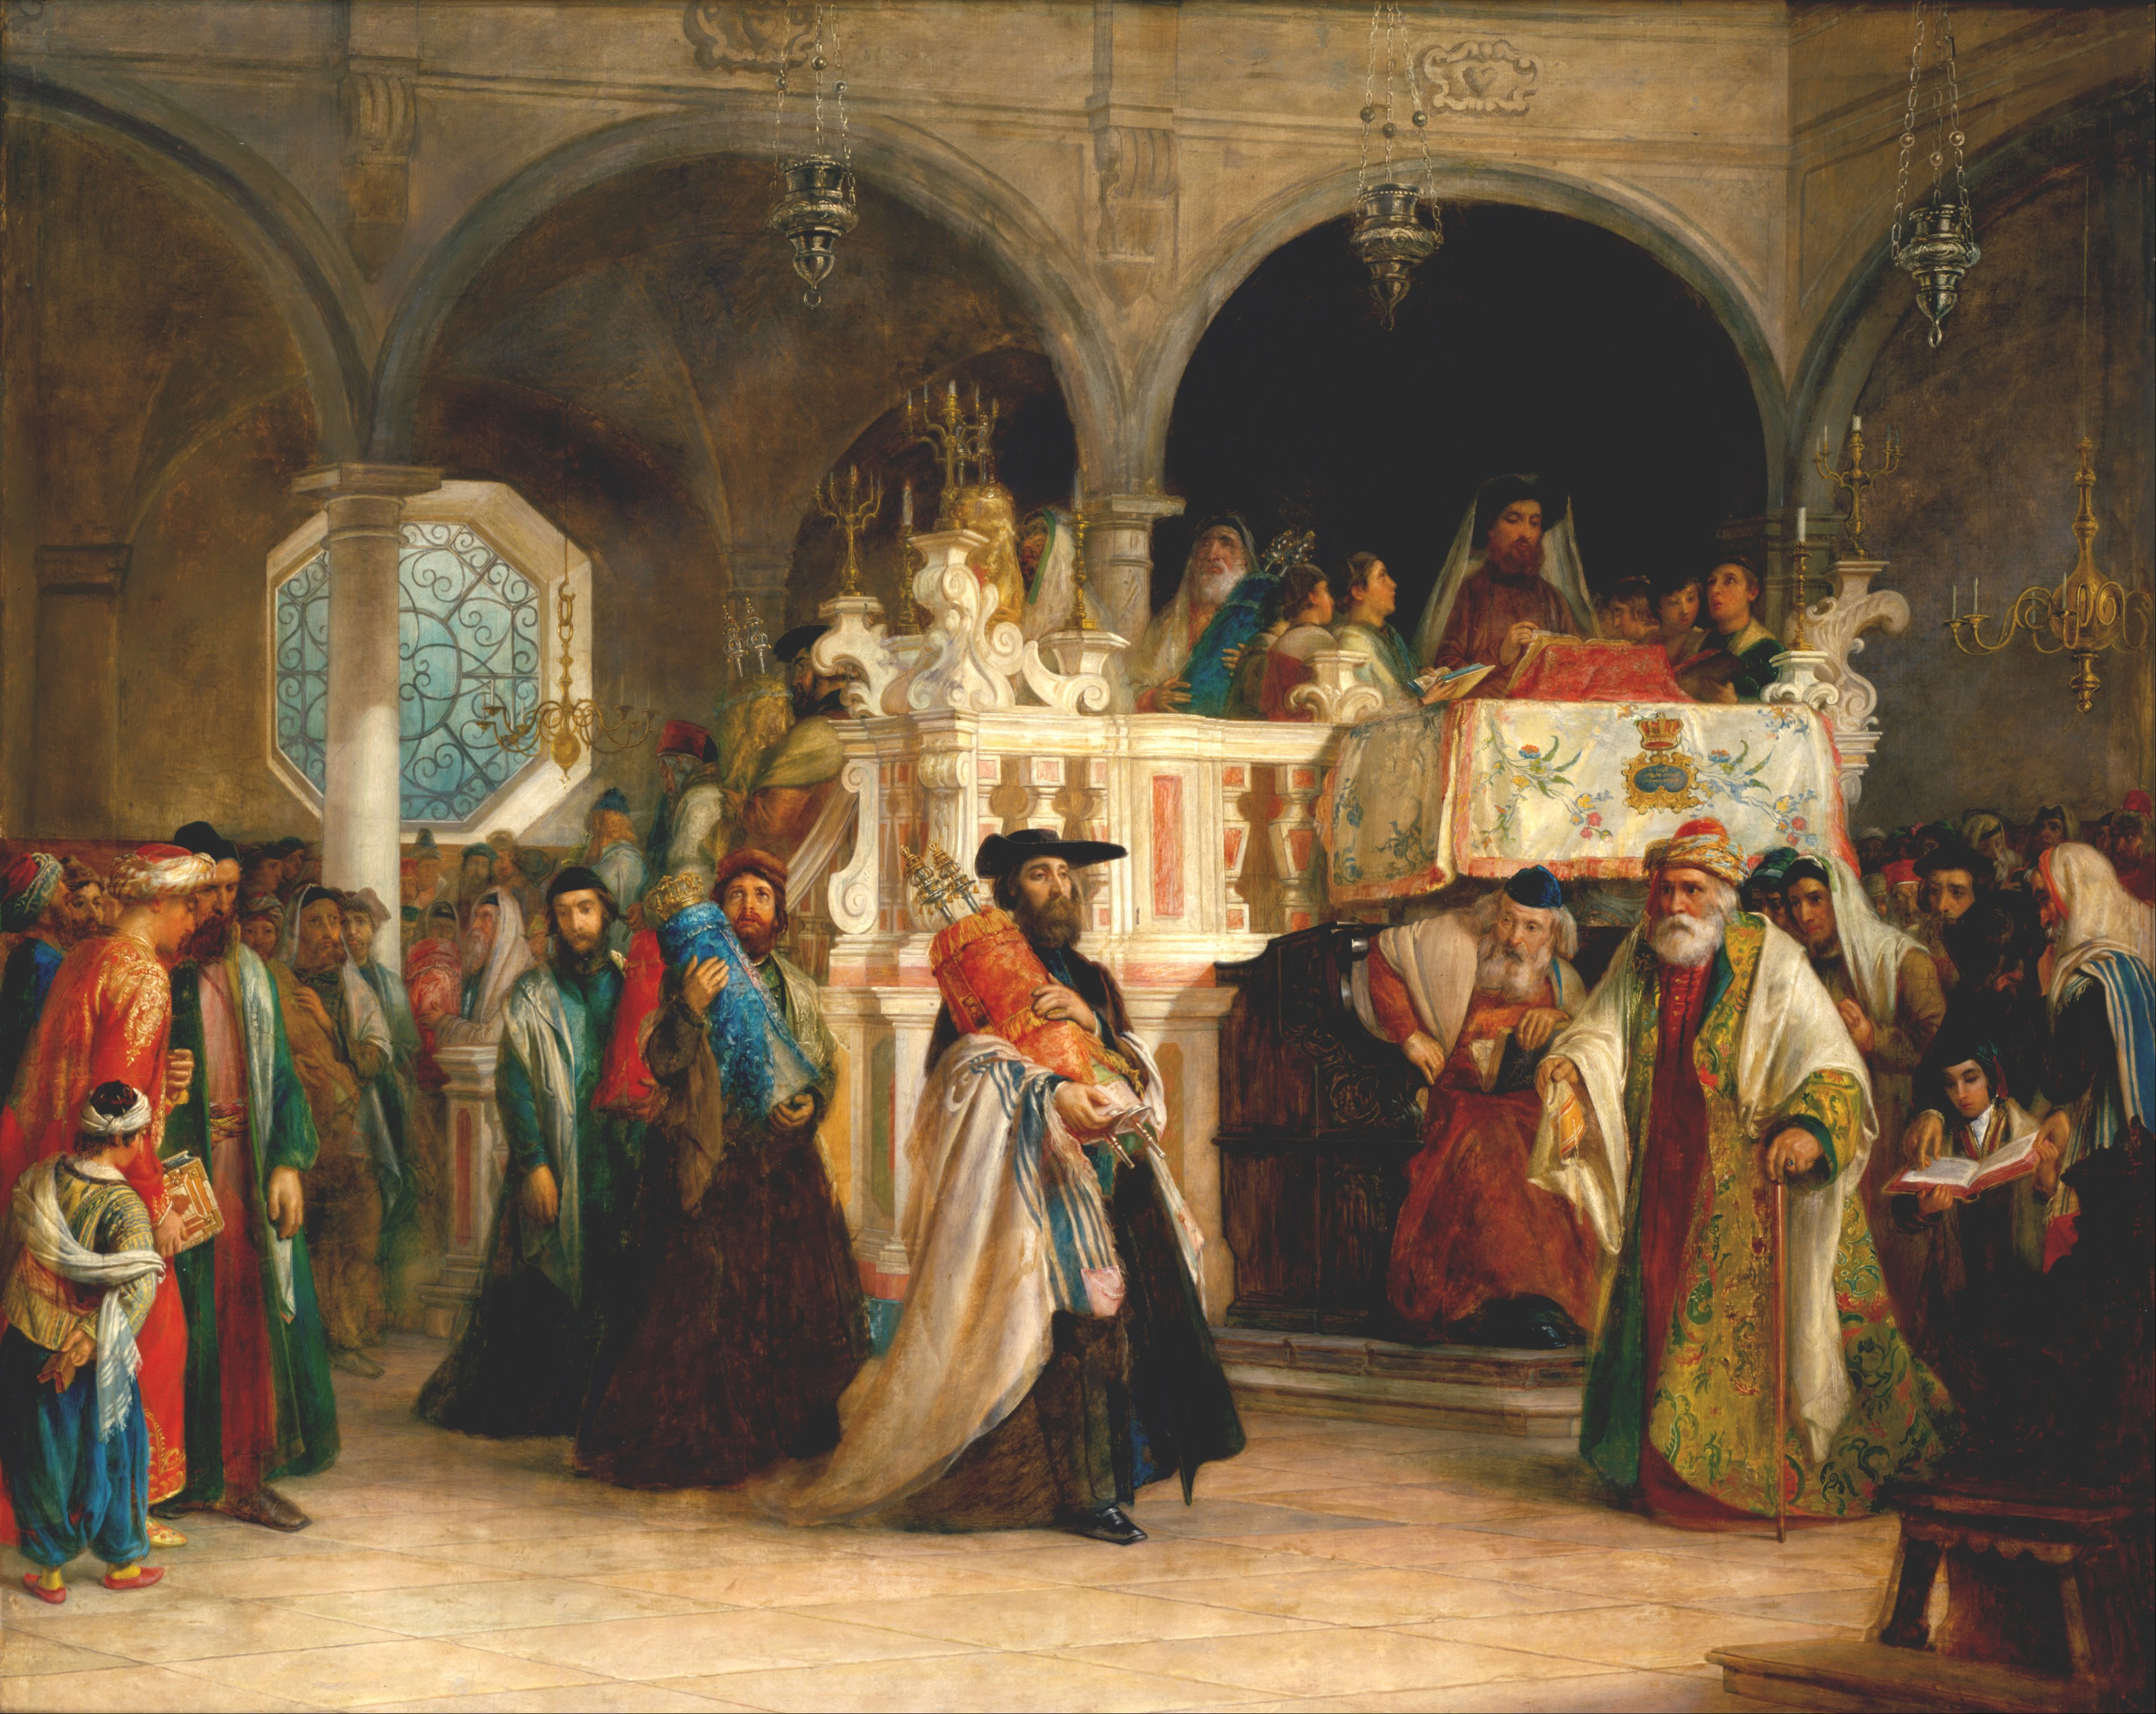 Solomon_Alexander_Hart_-_The_Feast_of_the_Rejoicing_of_the_Law_at_the_Synagogue_in_Leghorn,_Italy_-_Google_Art_Project